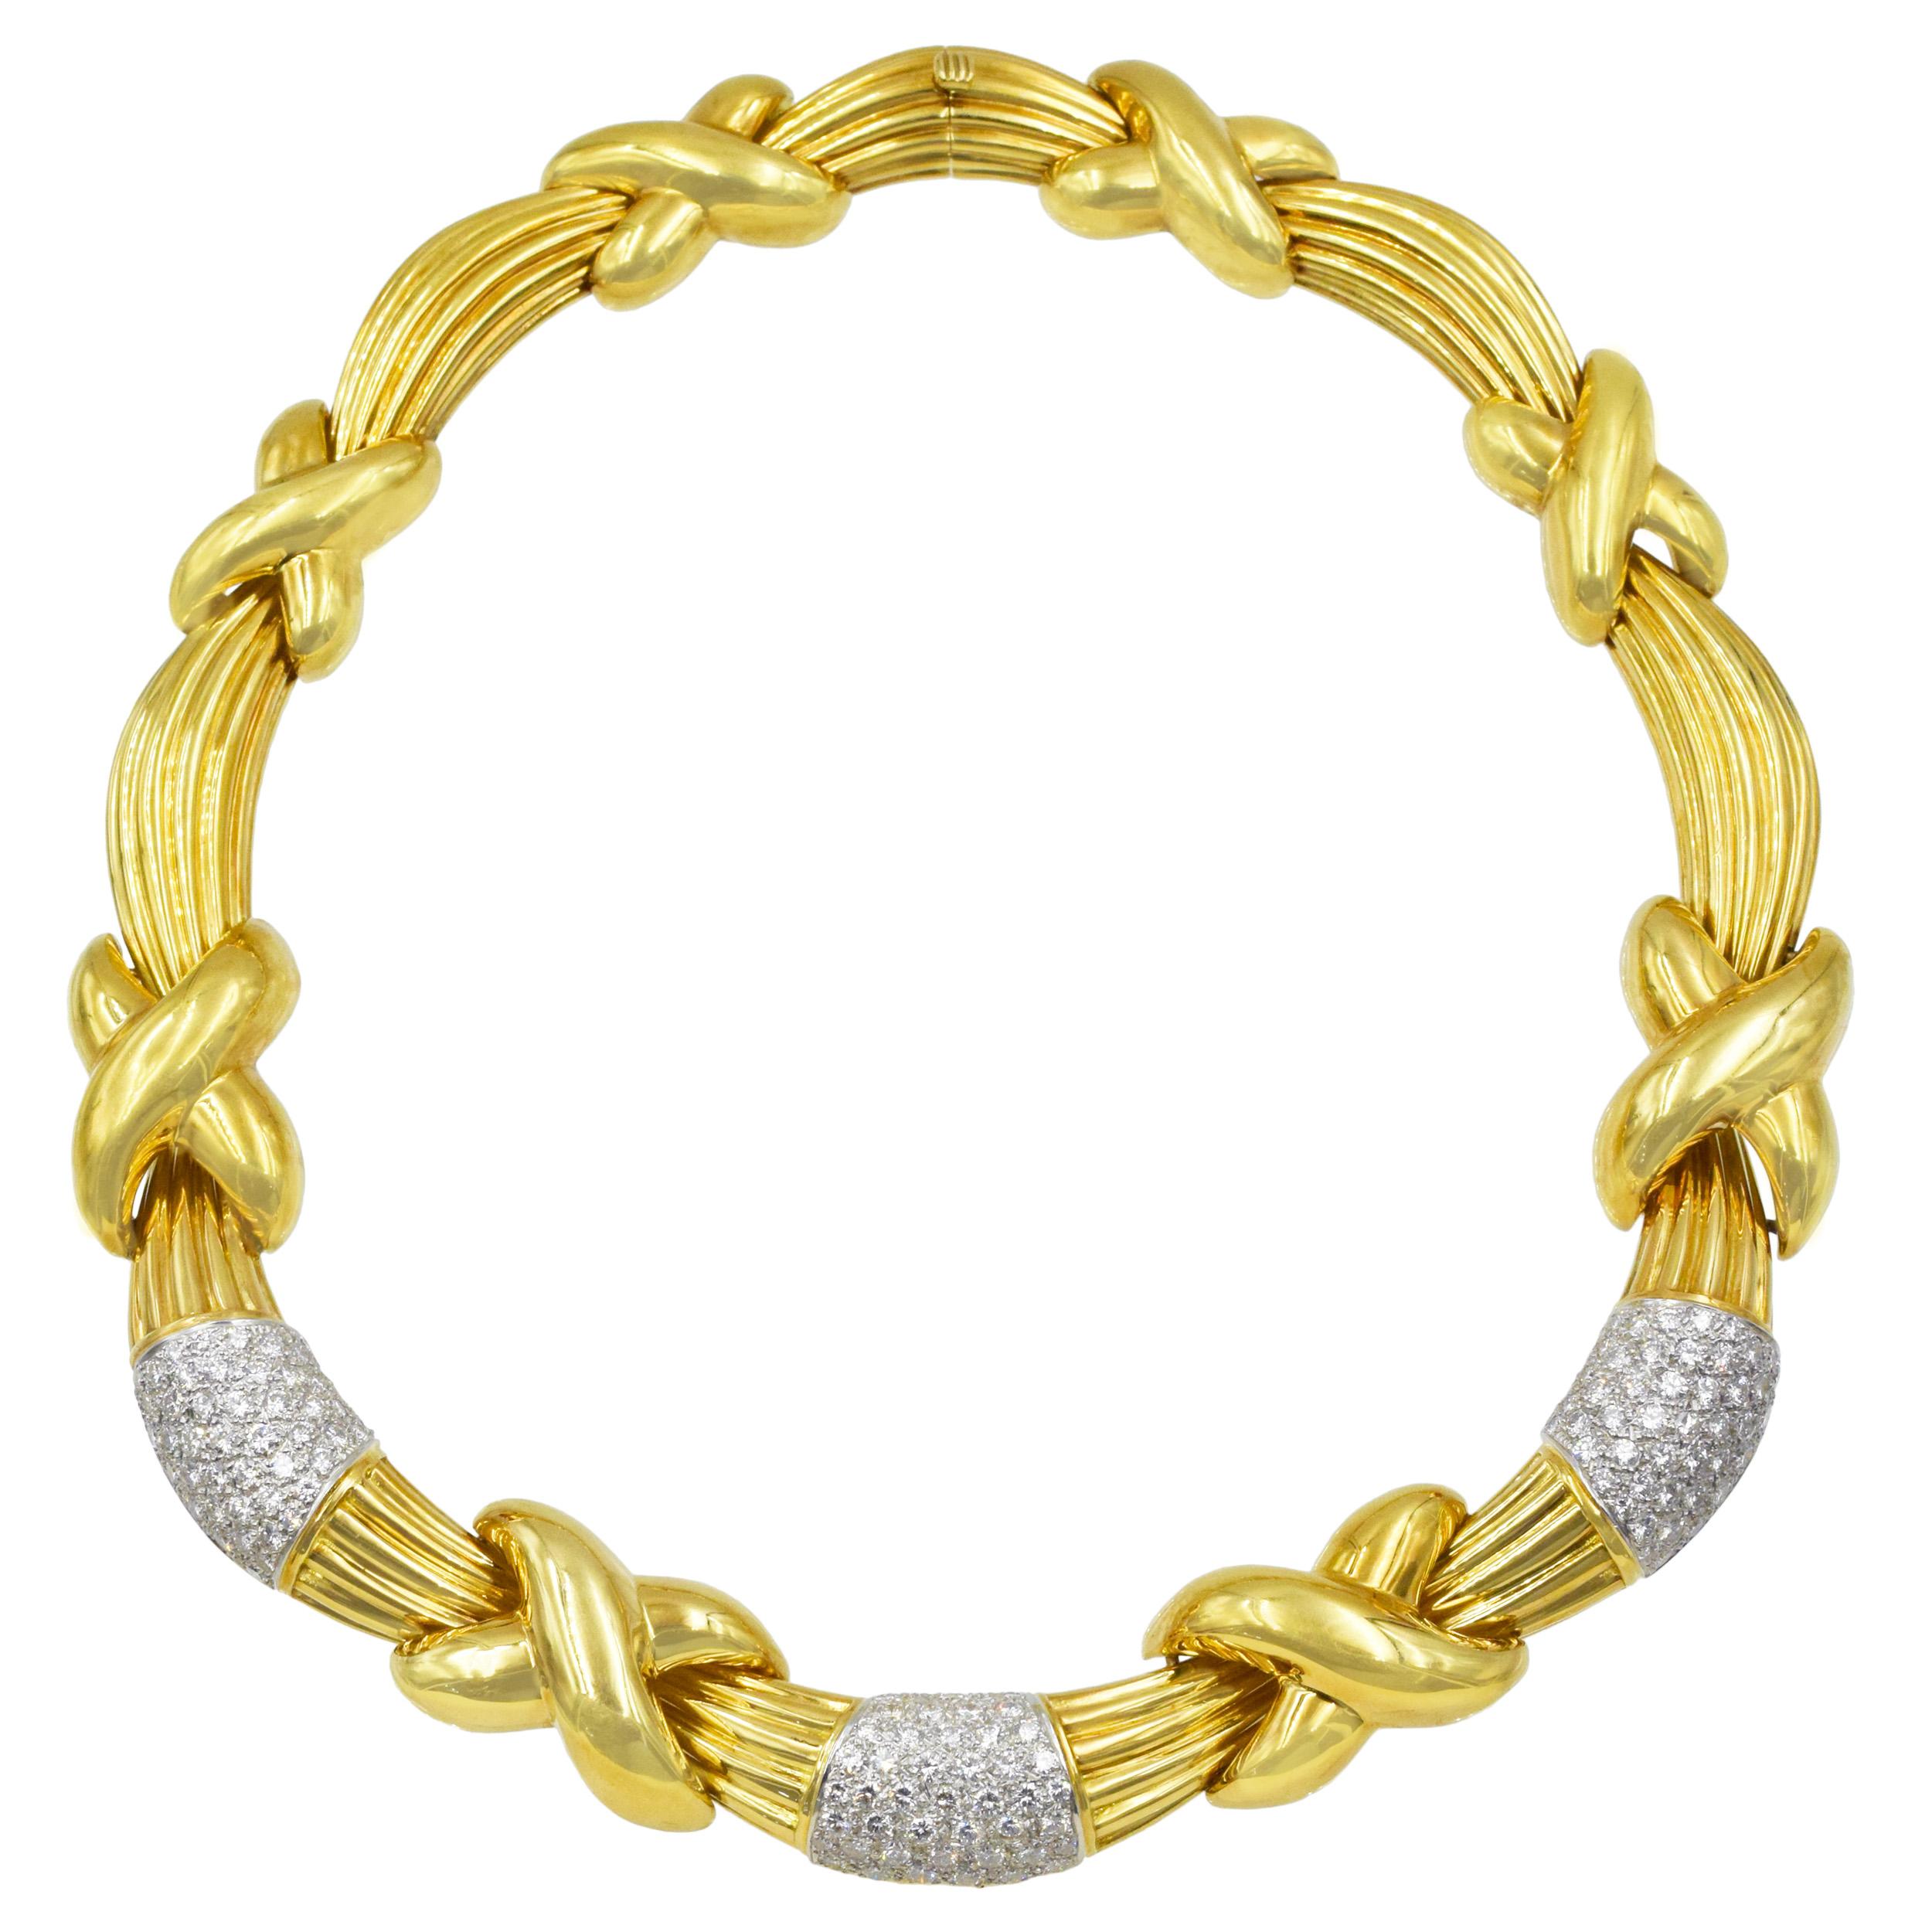 Two-Color Gold and Diamond Necklace
This necklace has 159 round diamonds weighing approx 10 cts. (Color: G-I, Clarity VS) set in 18k gold, Length 15 inches Width: 0.5-0.75 inches.  Weight: 223 grams
